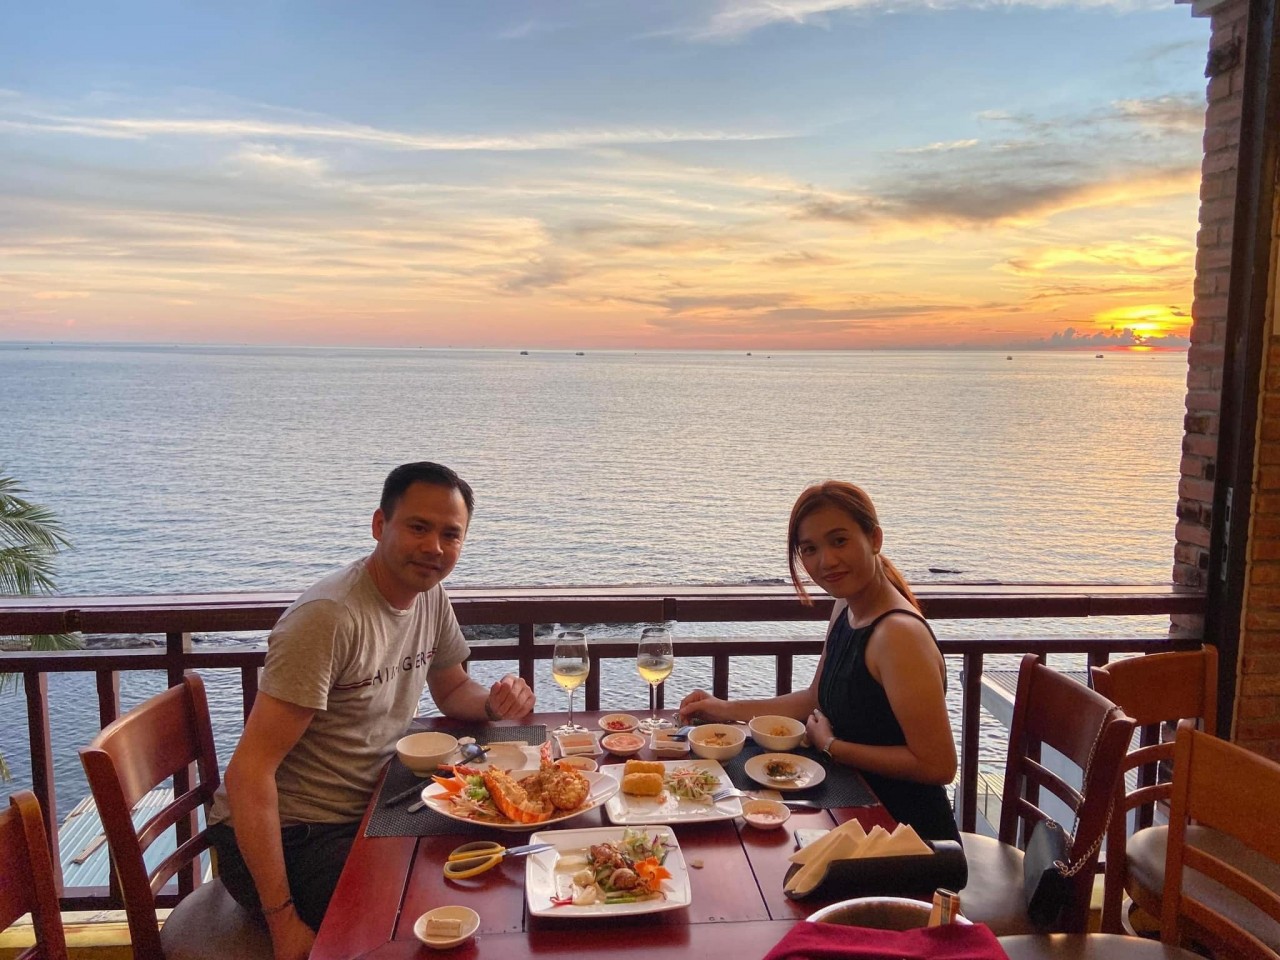 Xin Chao Restaurant is famous for its amazing sunset view